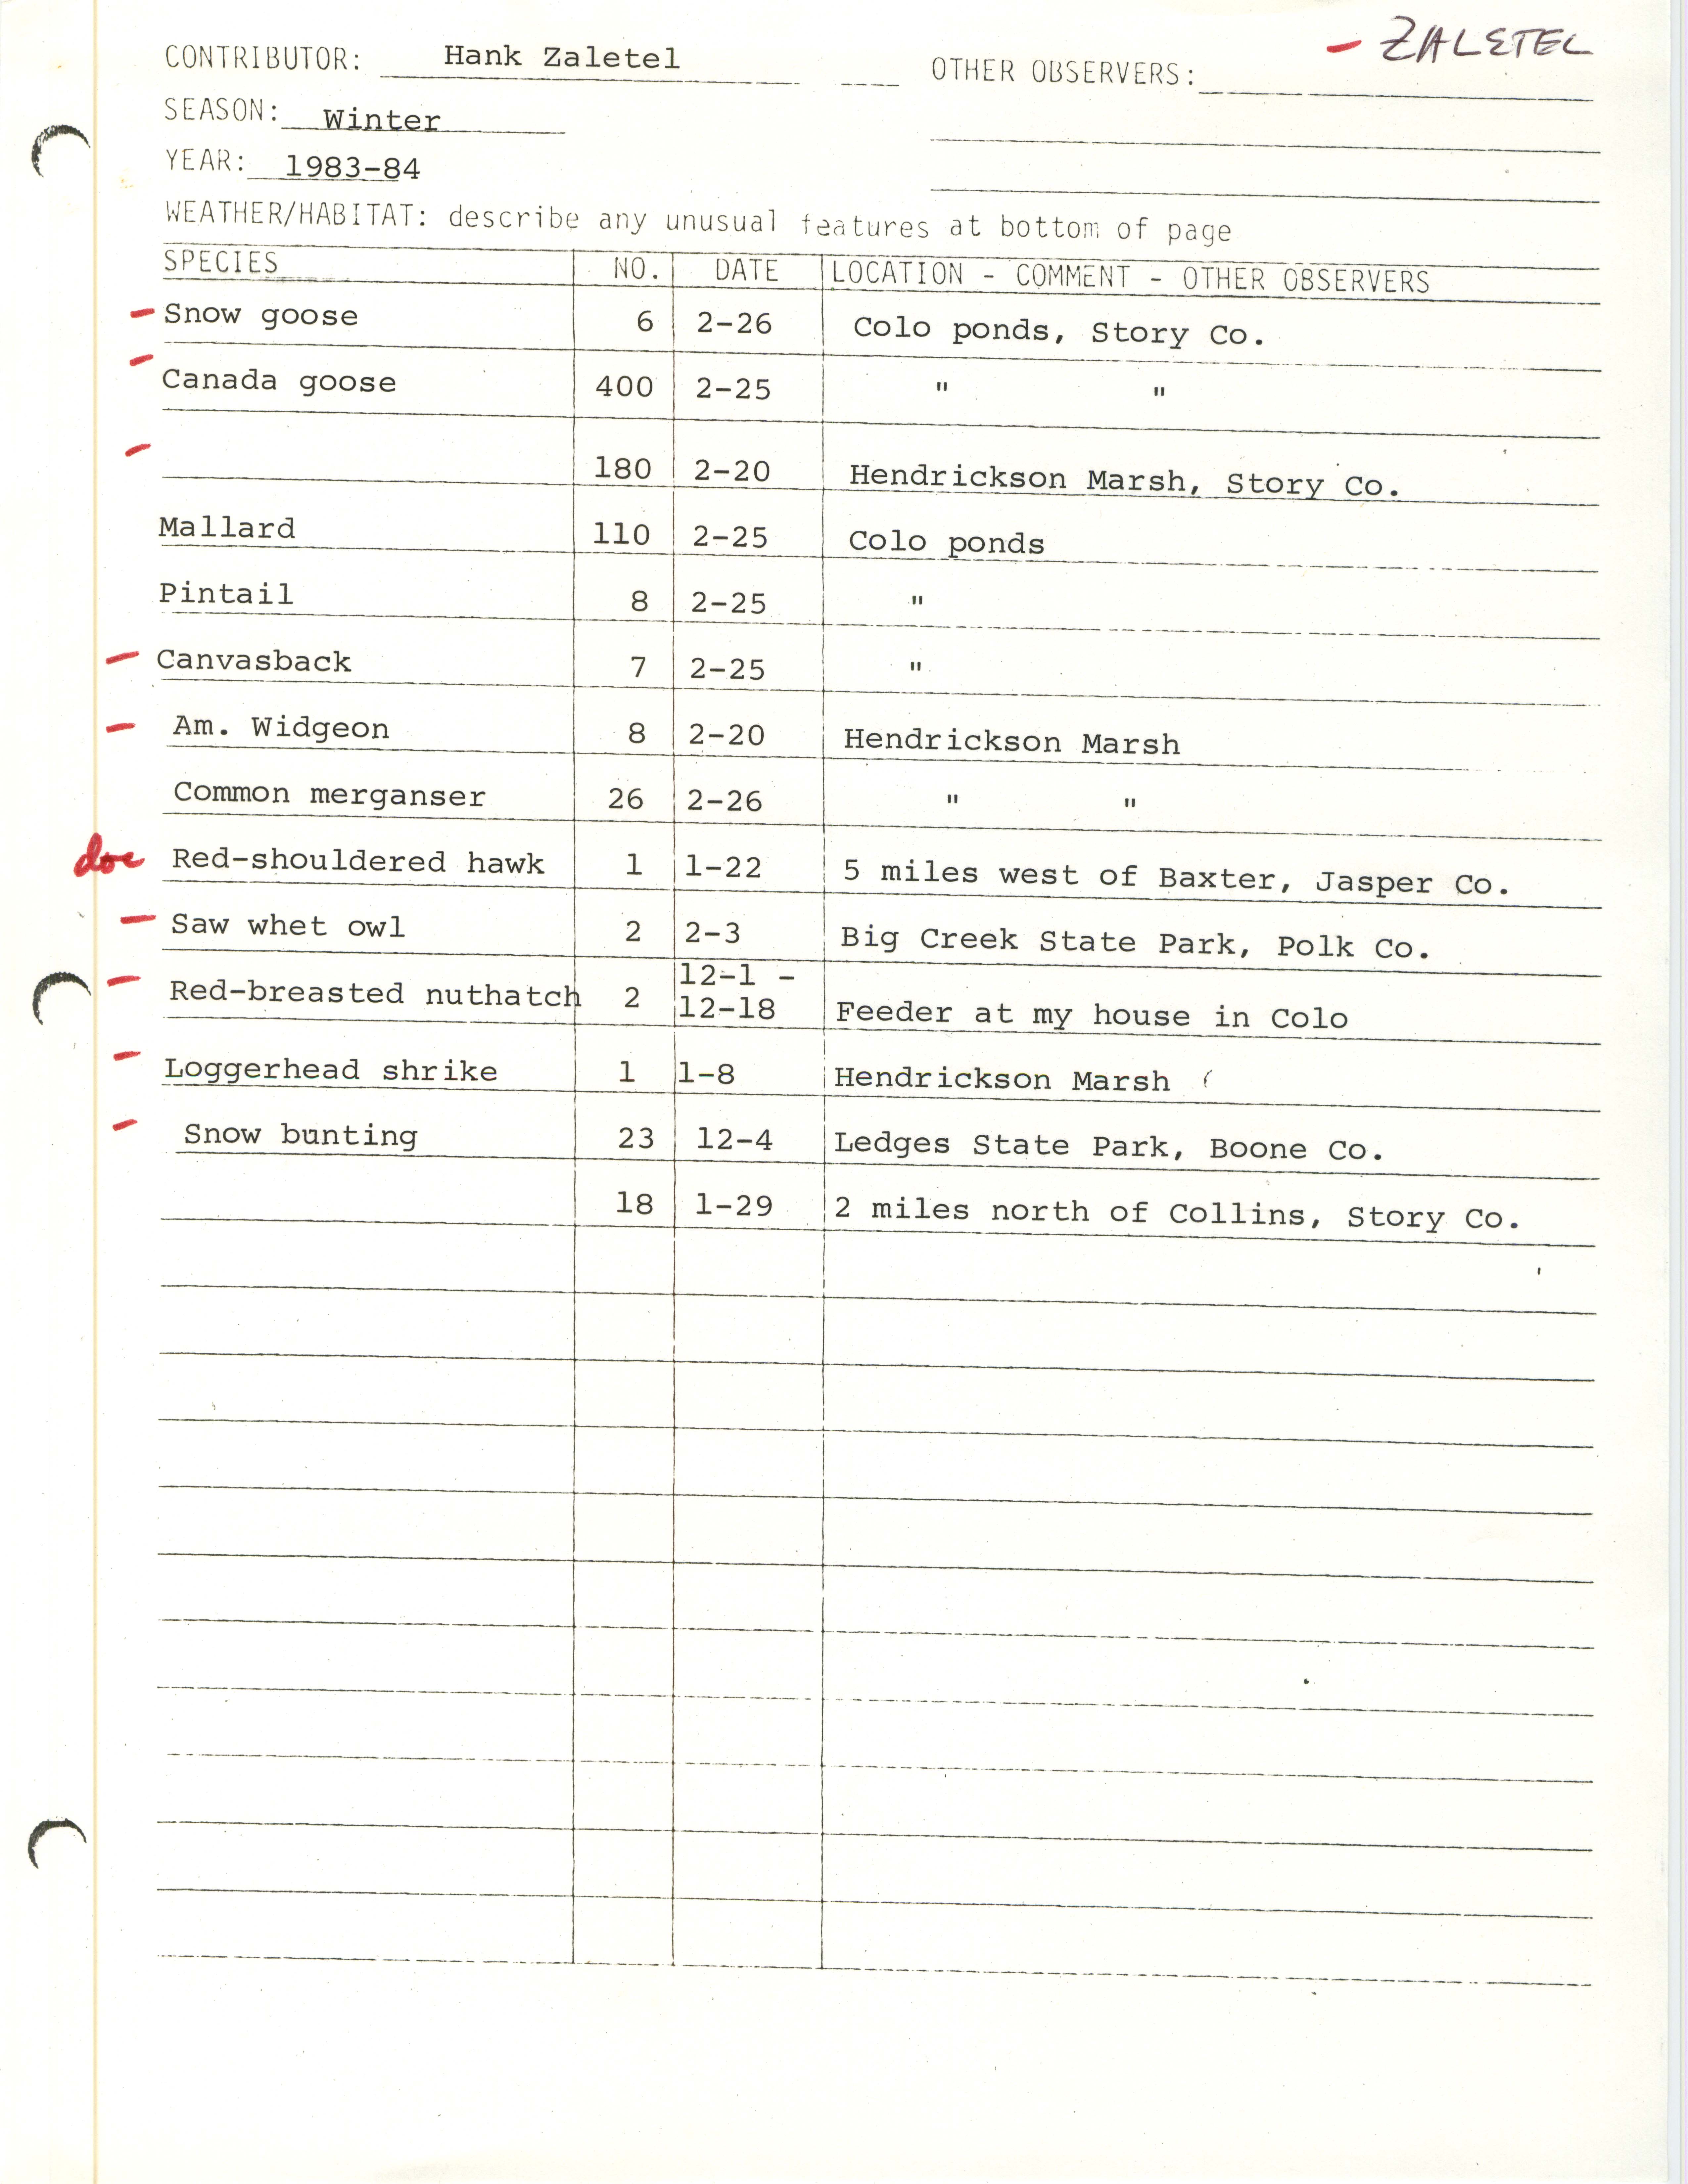 Field notes contributed by Hank Zaletel, winter 1983-1984